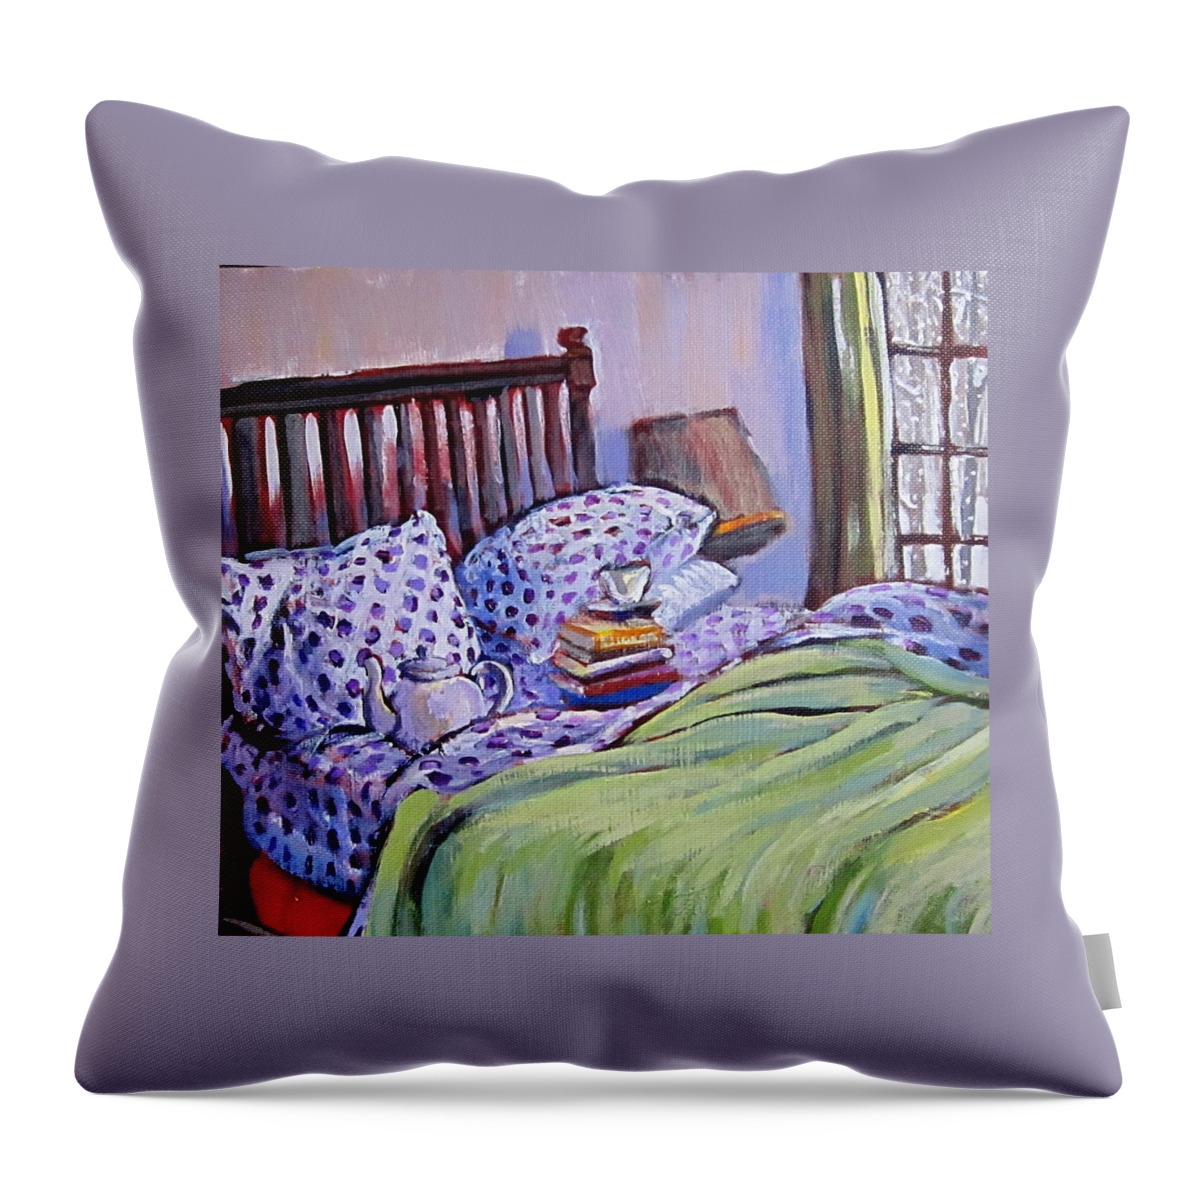 Bed Throw Pillow featuring the painting Bed And Books by Tilly Strauss